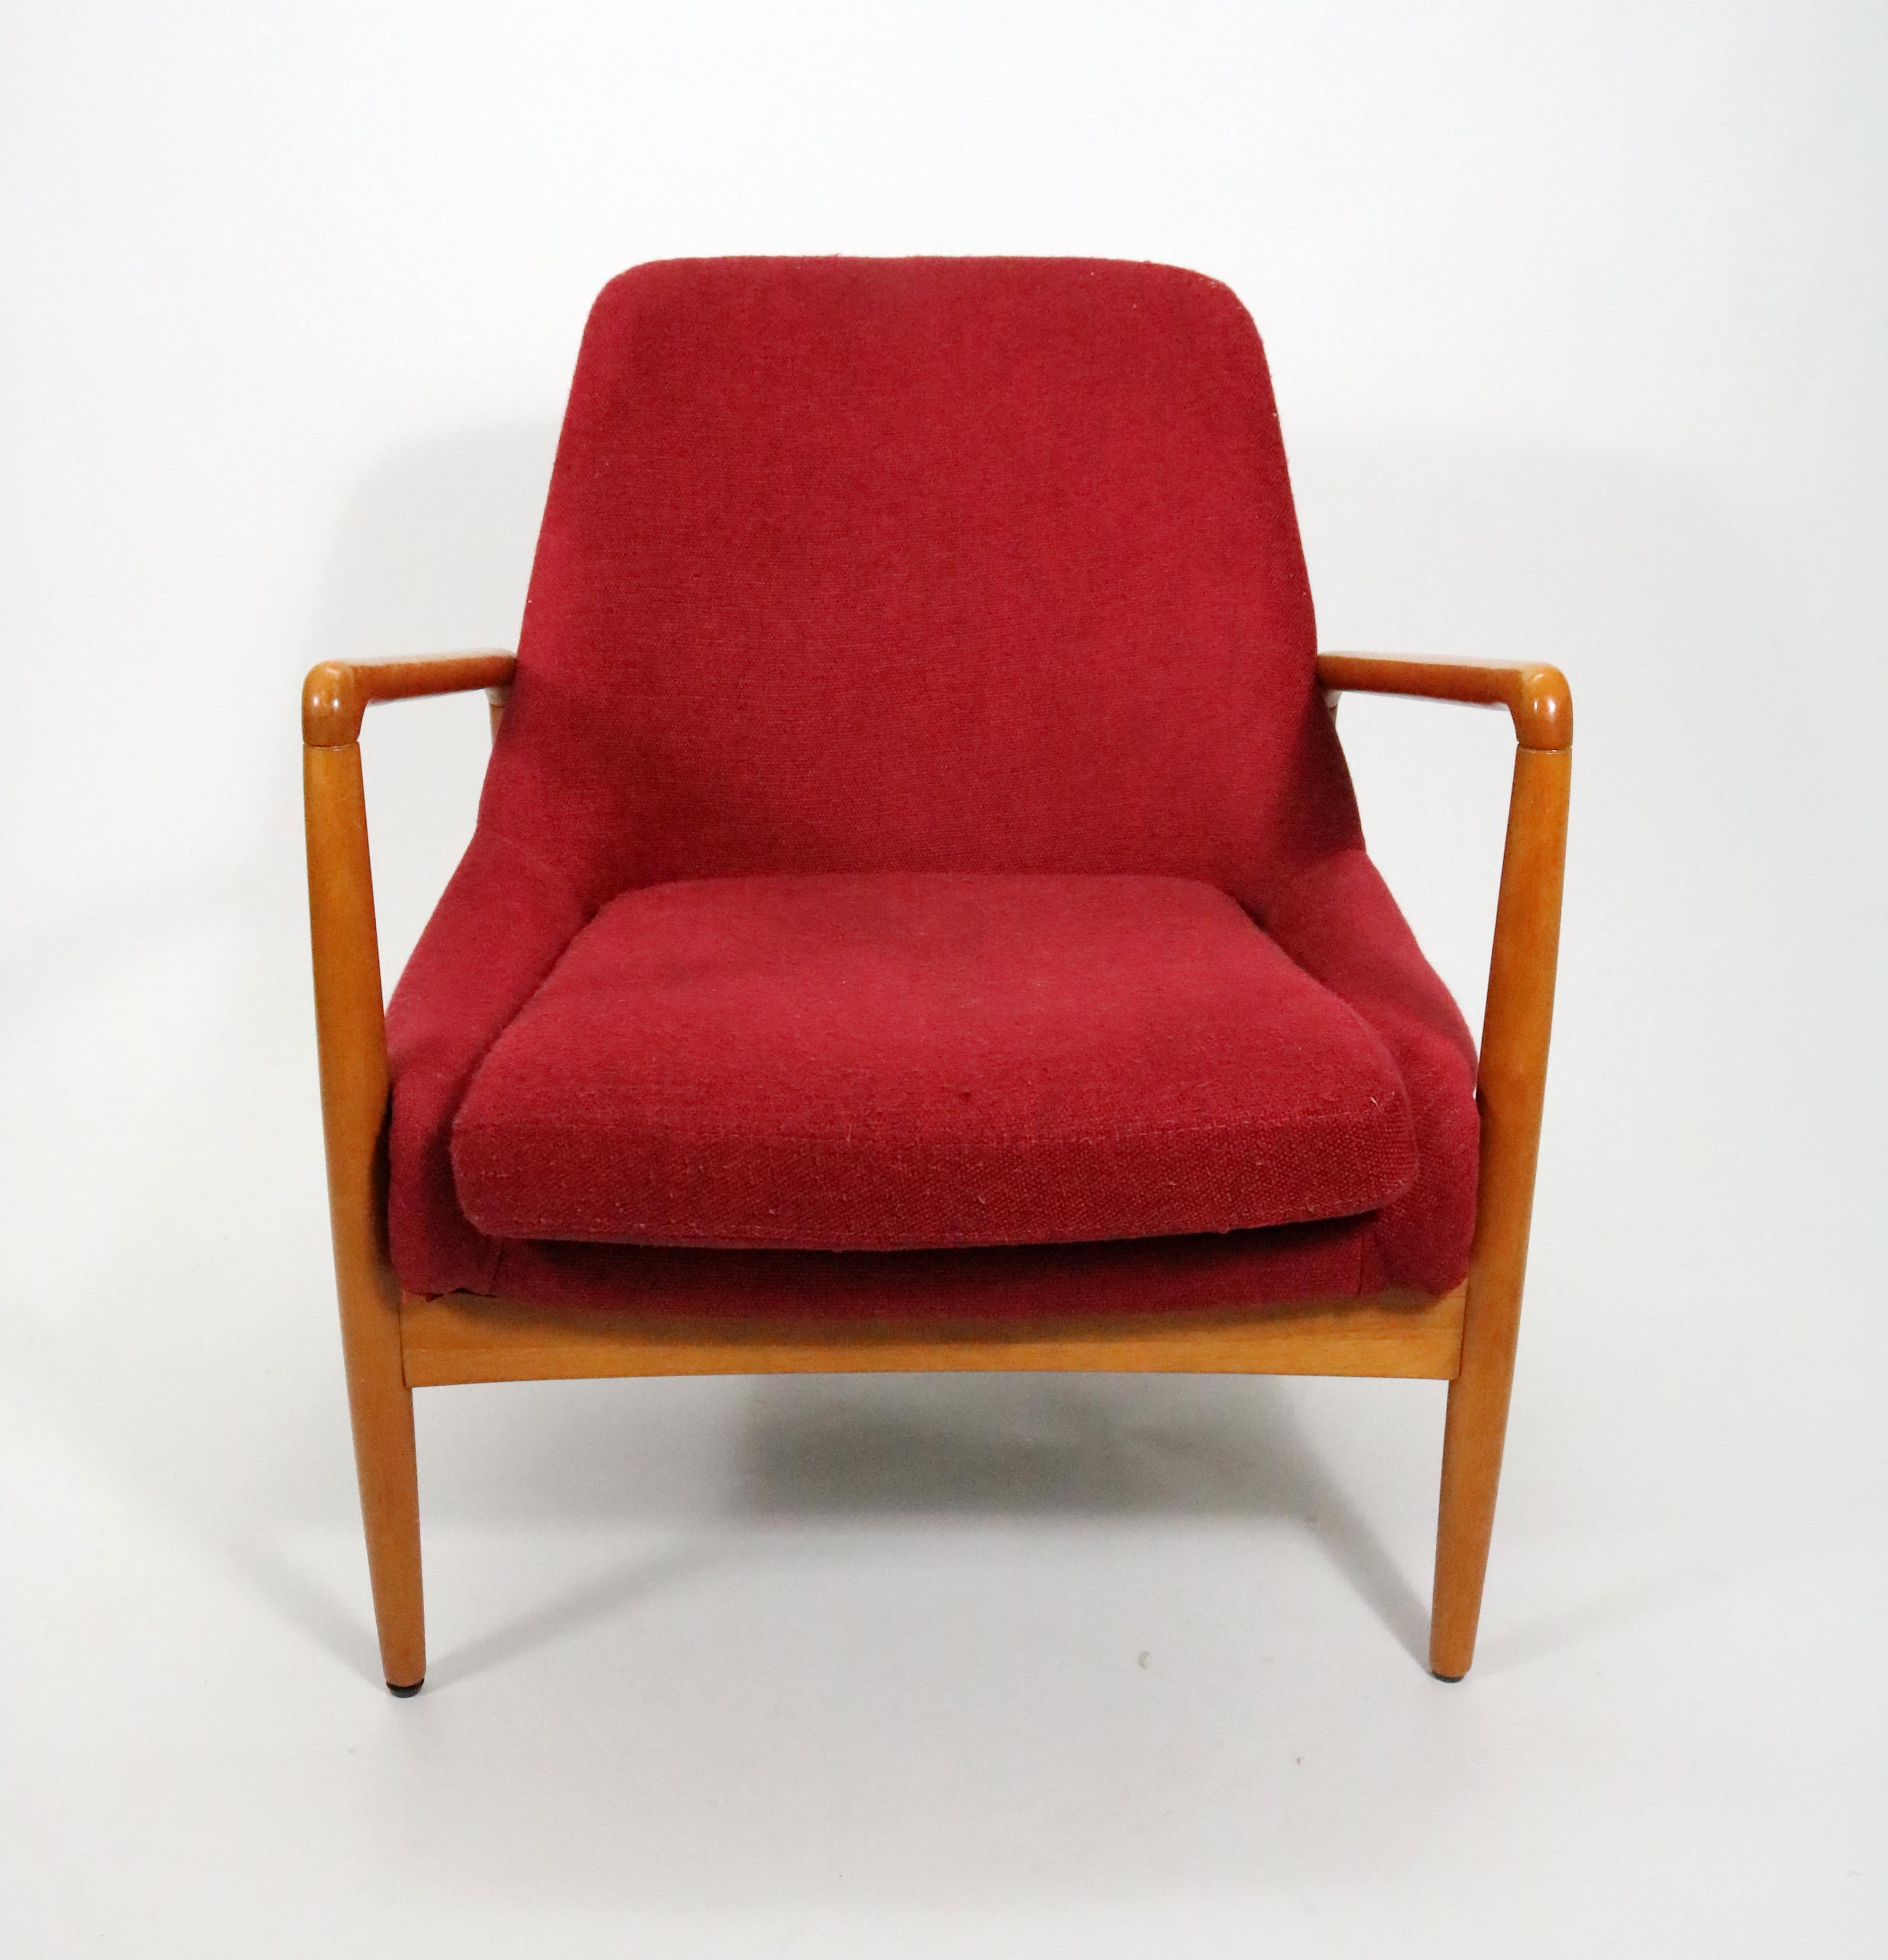 A rare mid-century lounge chair in honey finish walnut by John Fossum for the Shield Chair Company of California. 

John K. Fossum grew up in California, the child of US immigrants from Norway and founded the Shield Chair Company of California in